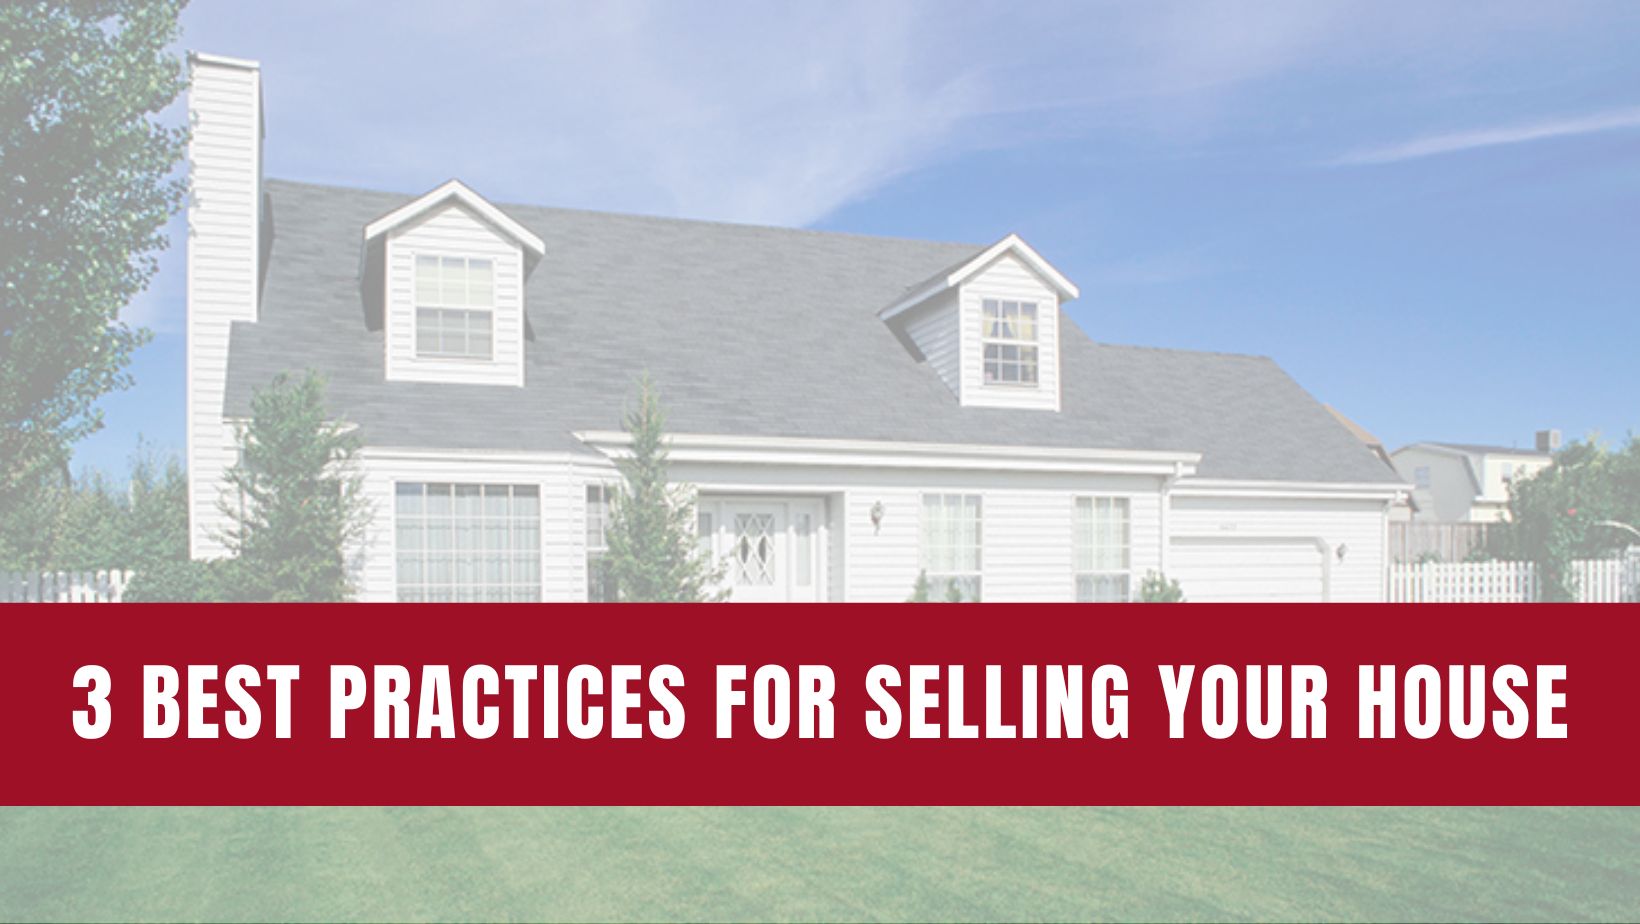 3 Best Practices For Selling Your House This Year